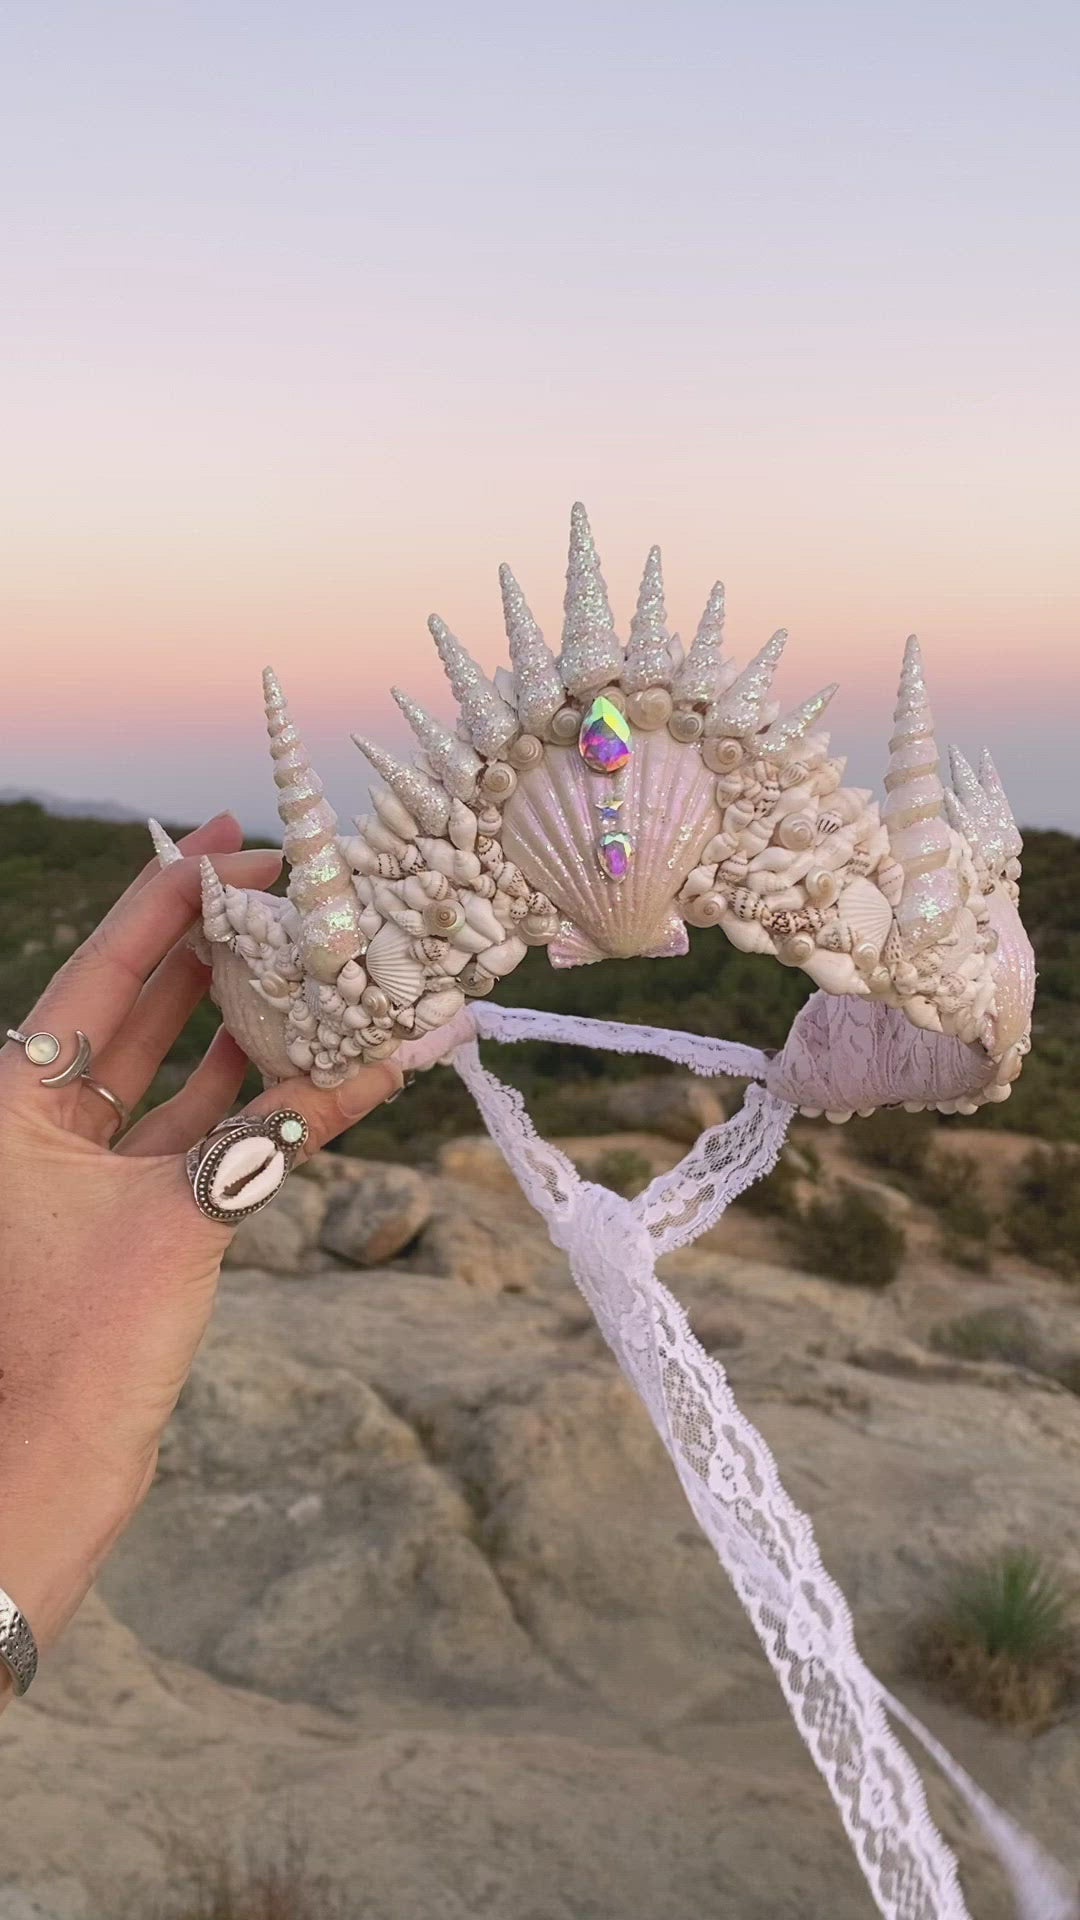 video of a seashell headband being held up against the sky at sunset